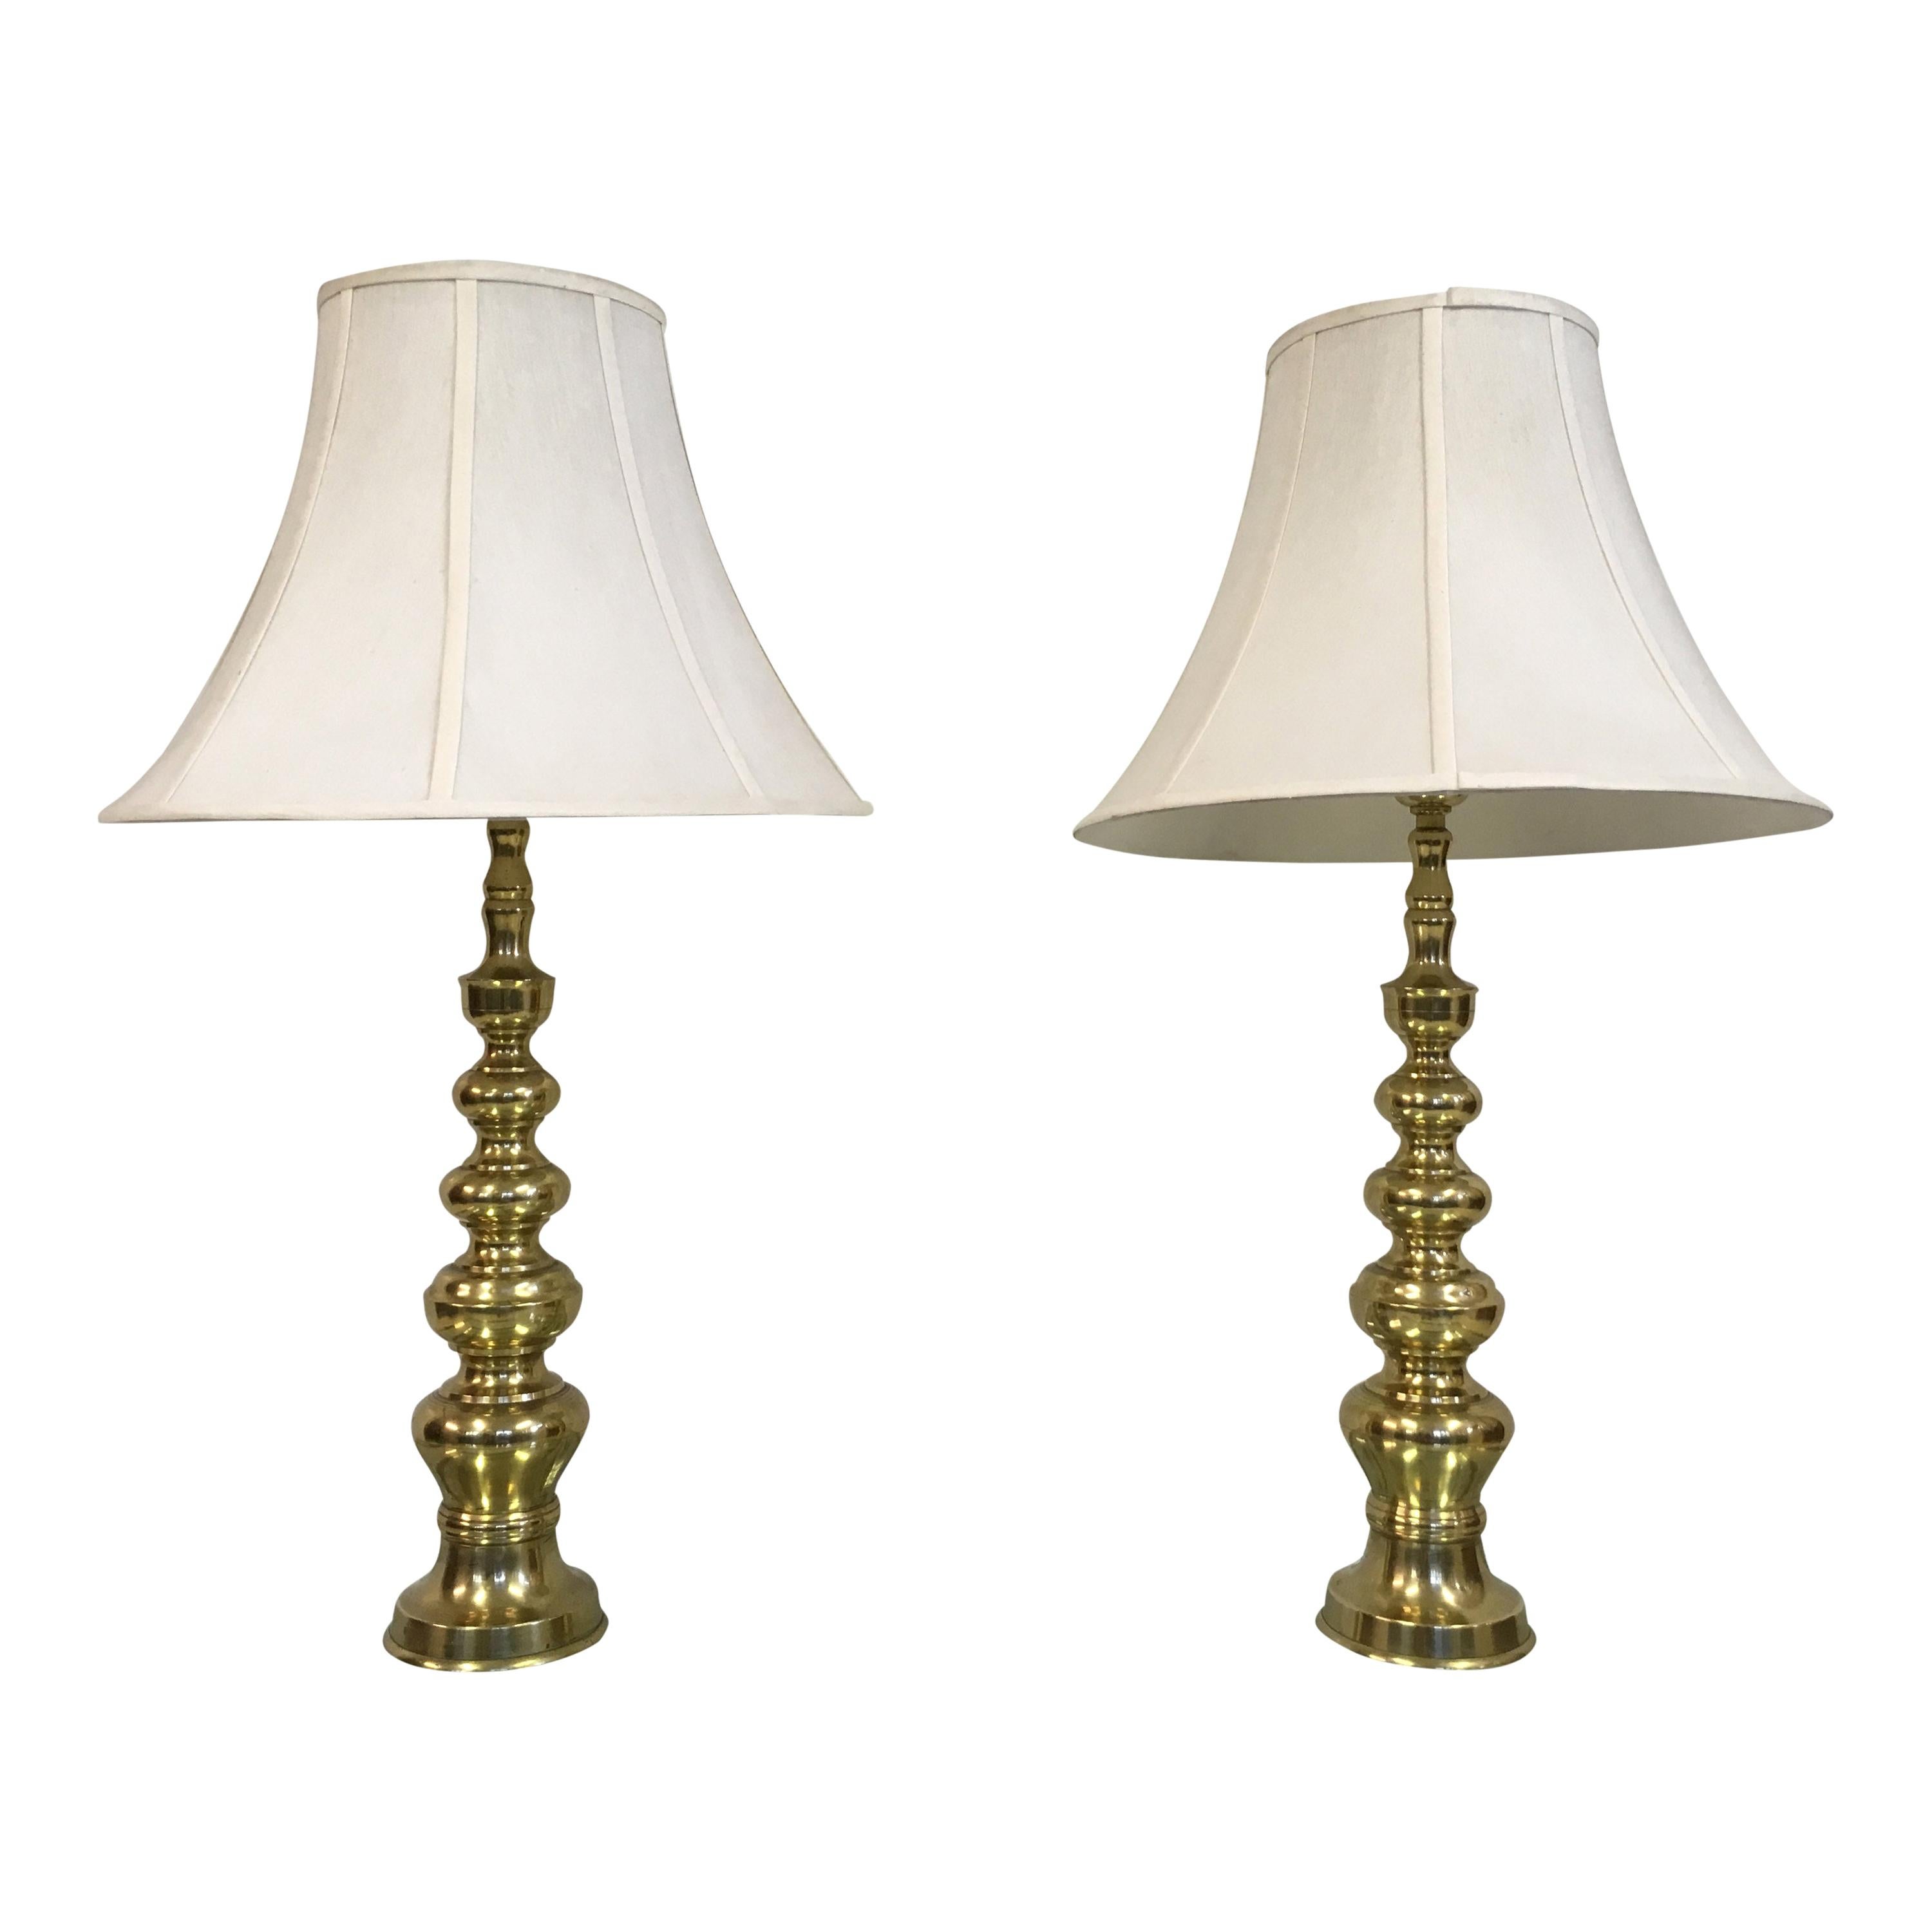 Pair of Vintage 1970s Brass Table Lamps